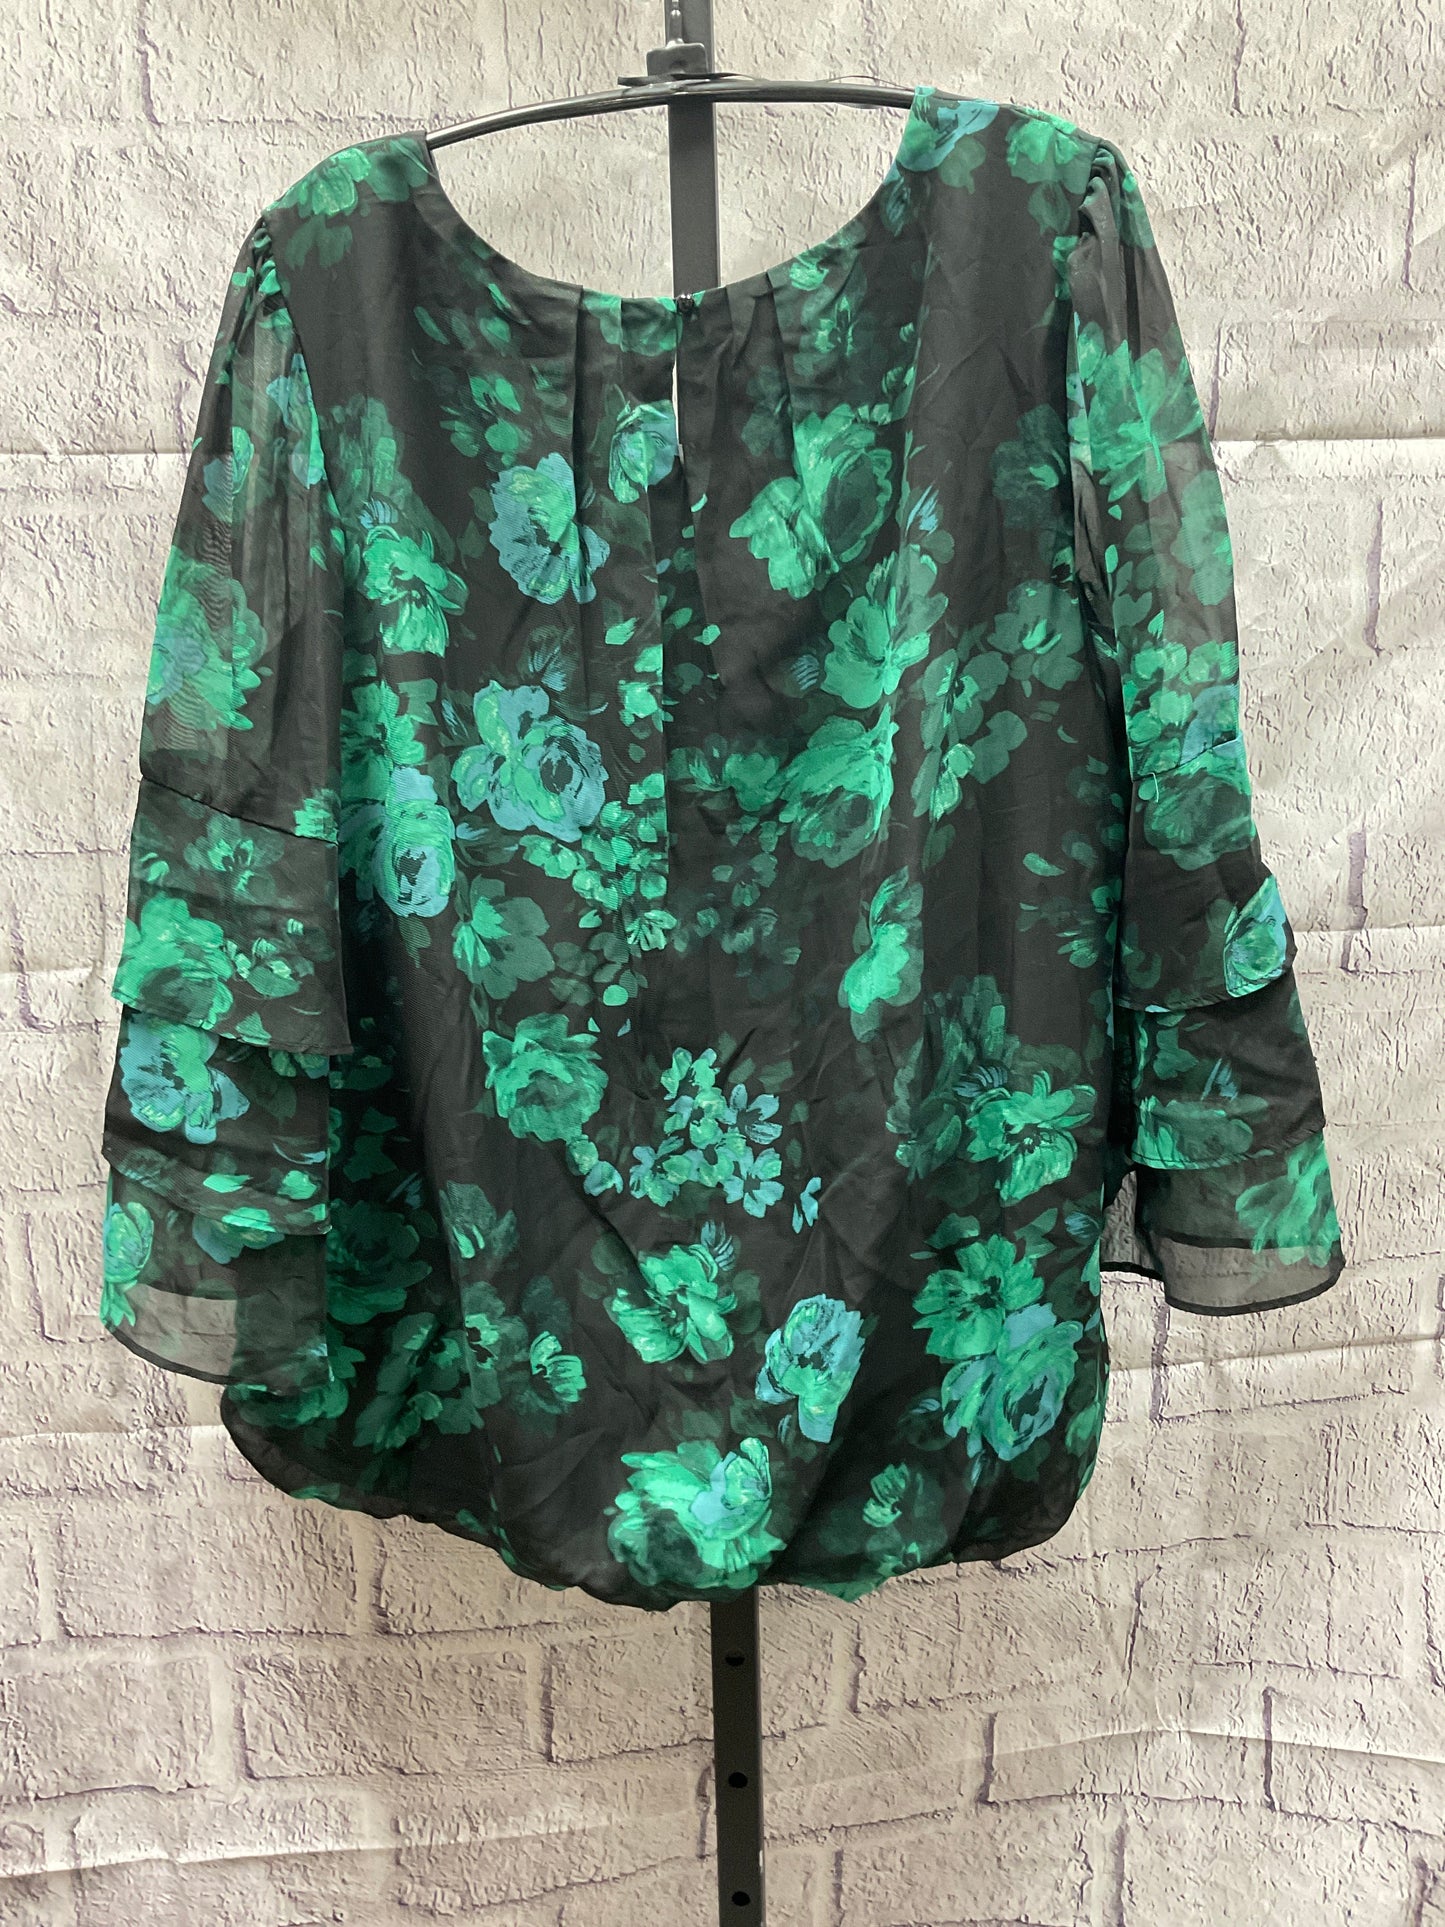 Top Long Sleeve By Roz And Ali  Size: 2x